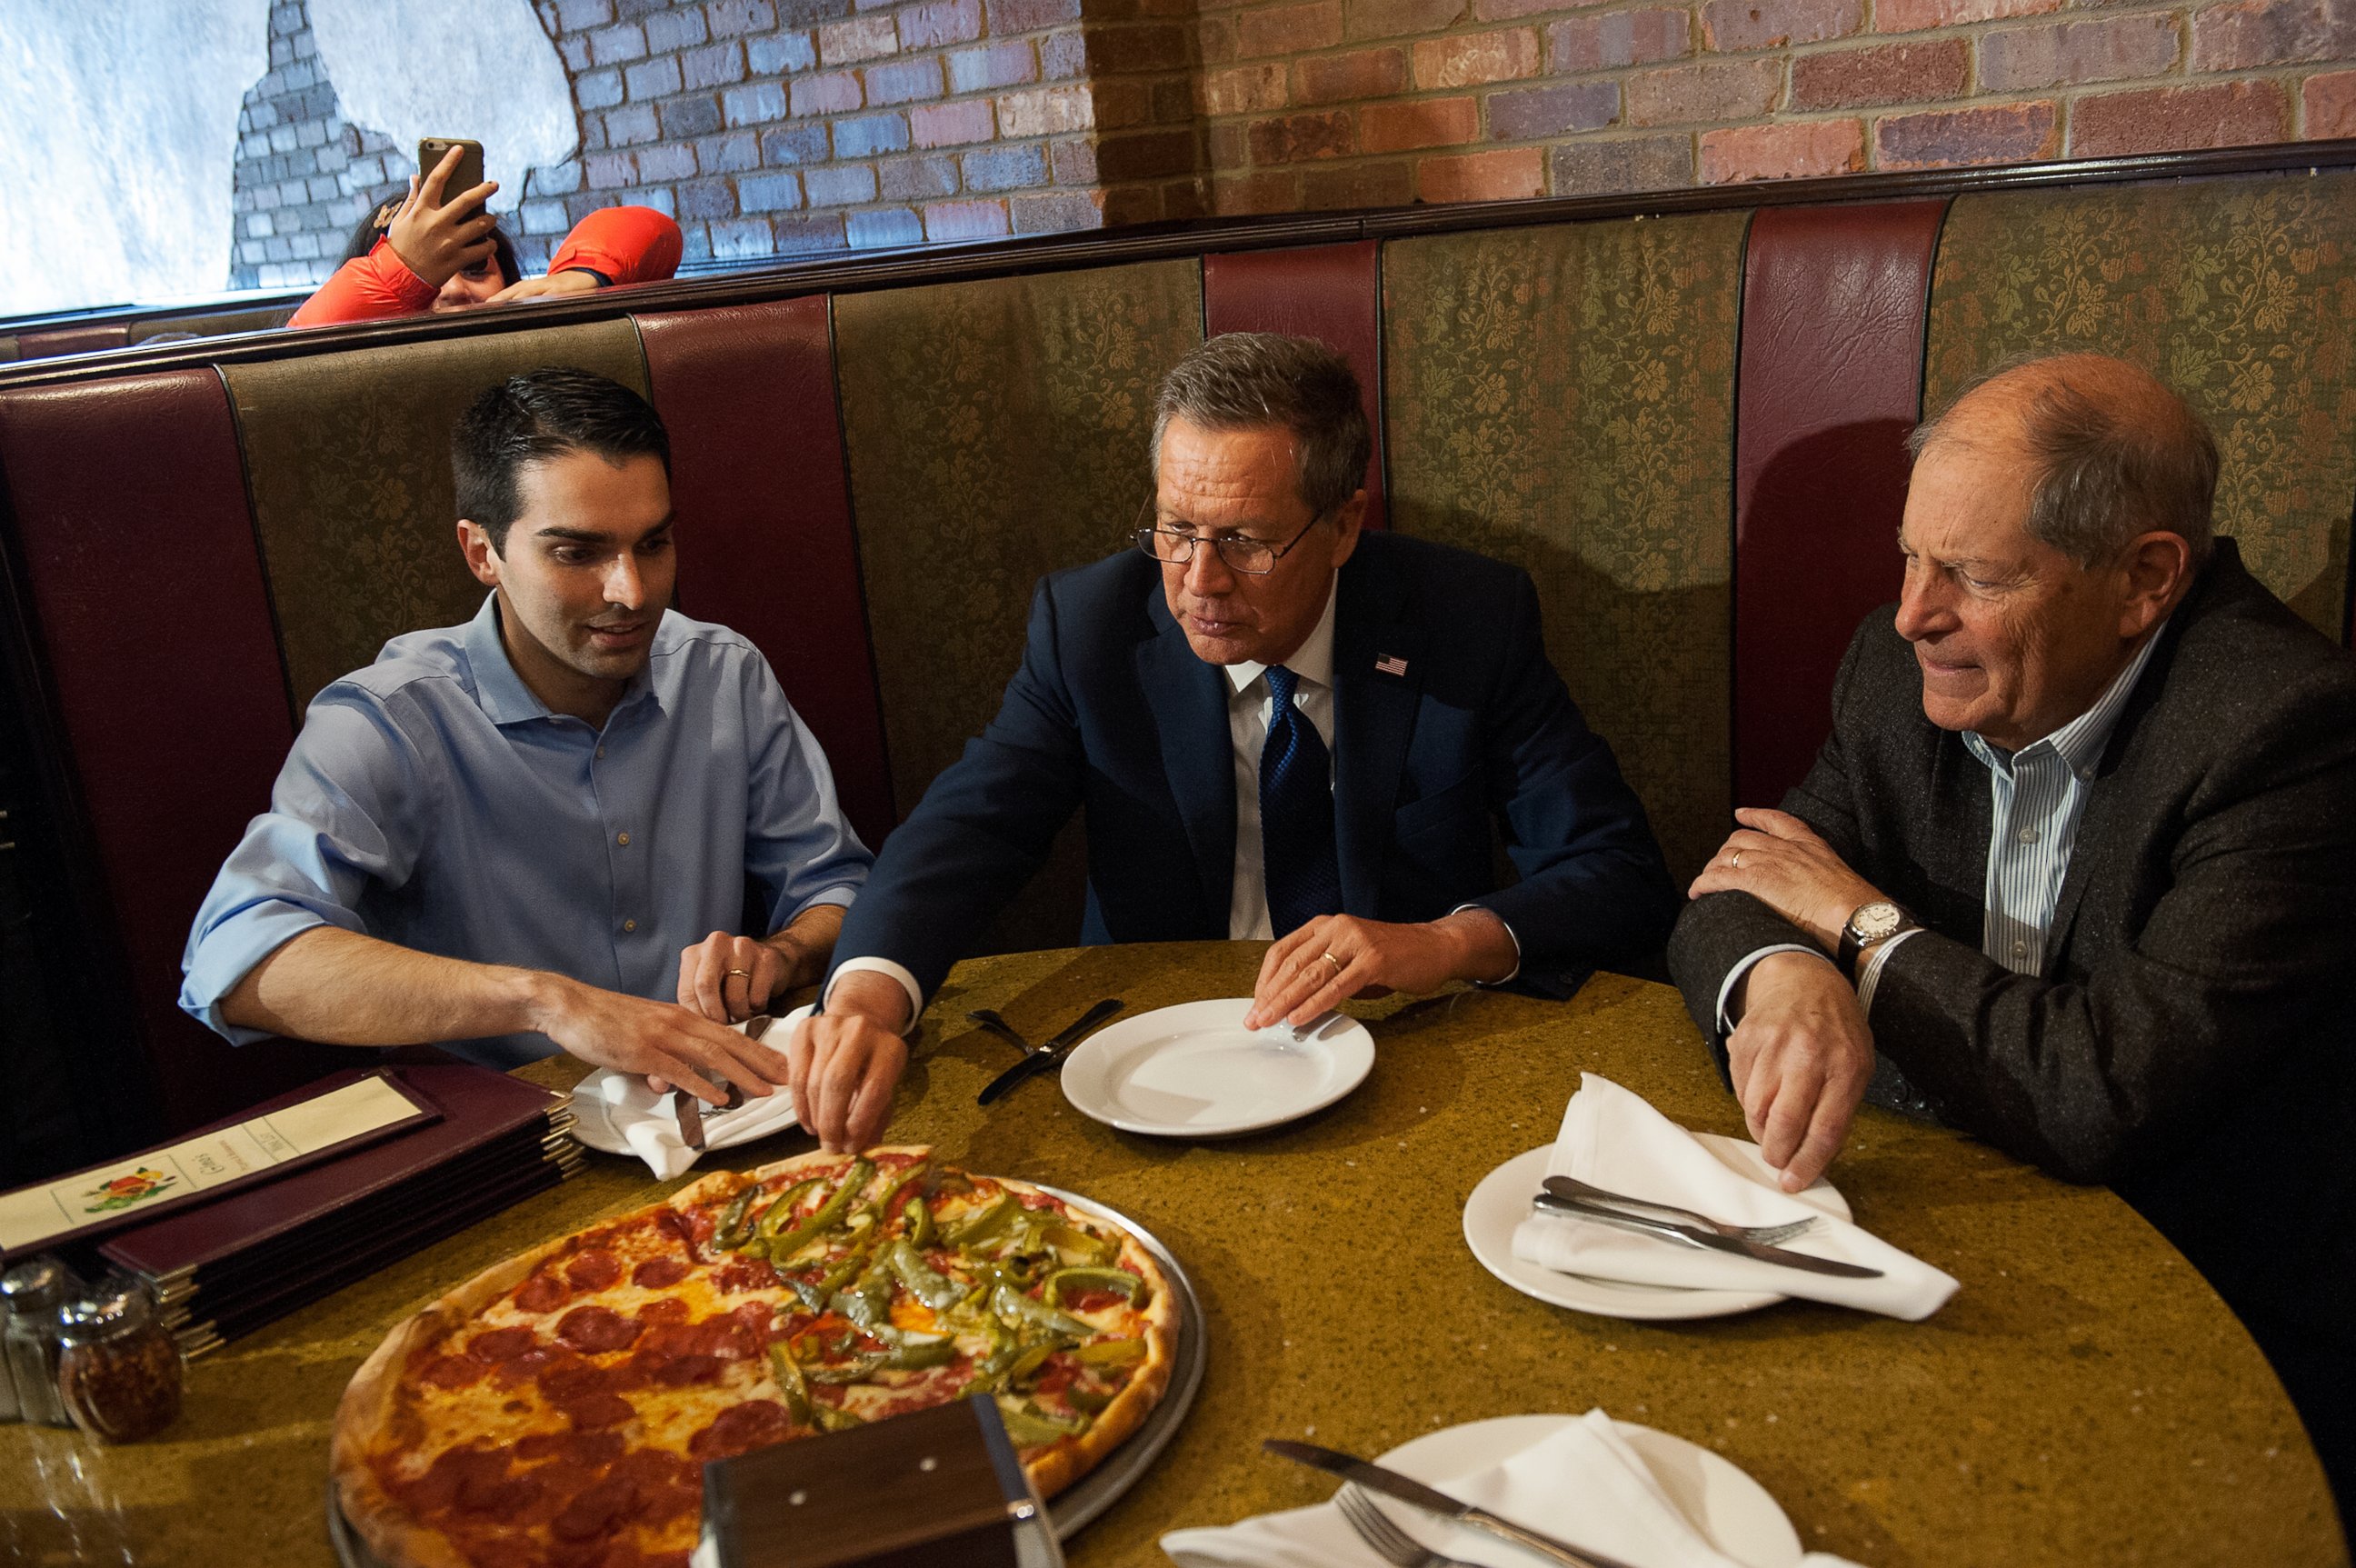 PHOTO: New York City Council member Eric Ulrich, Republican presidential candidate John Kasich, and former Rep. Bob Turner eat at Gino's Pizzeria and Restaurant, March 30, 2016, in the Queens, New York.